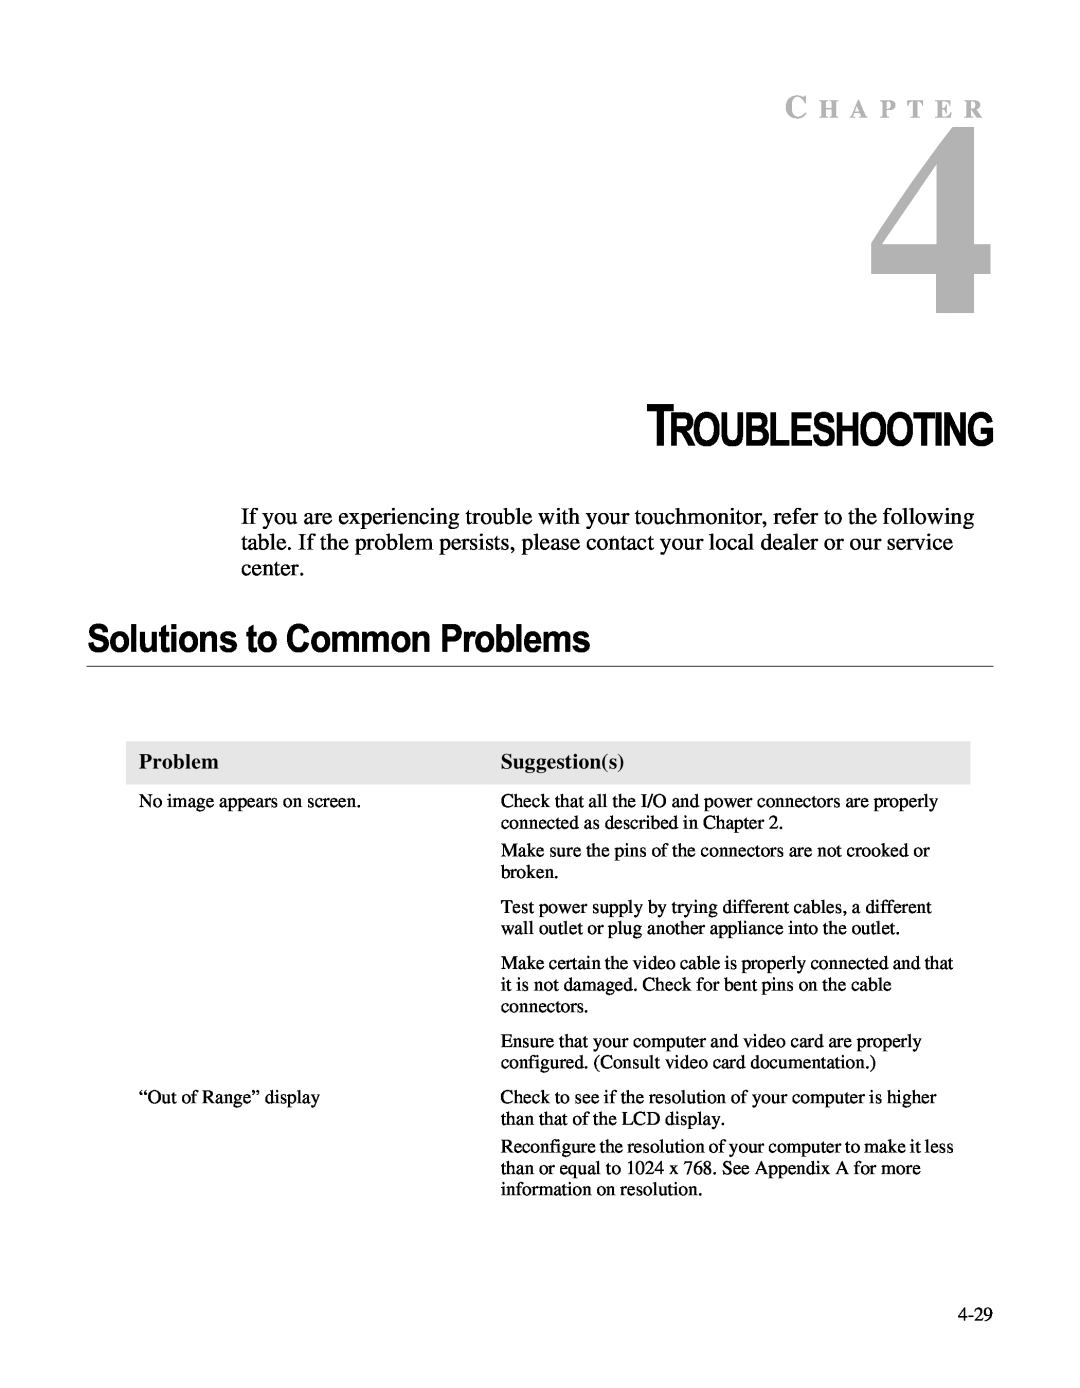 Elo TouchSystems LCD manual Troubleshooting, Solutions to Common Problems, C H A P T E R, Suggestions 